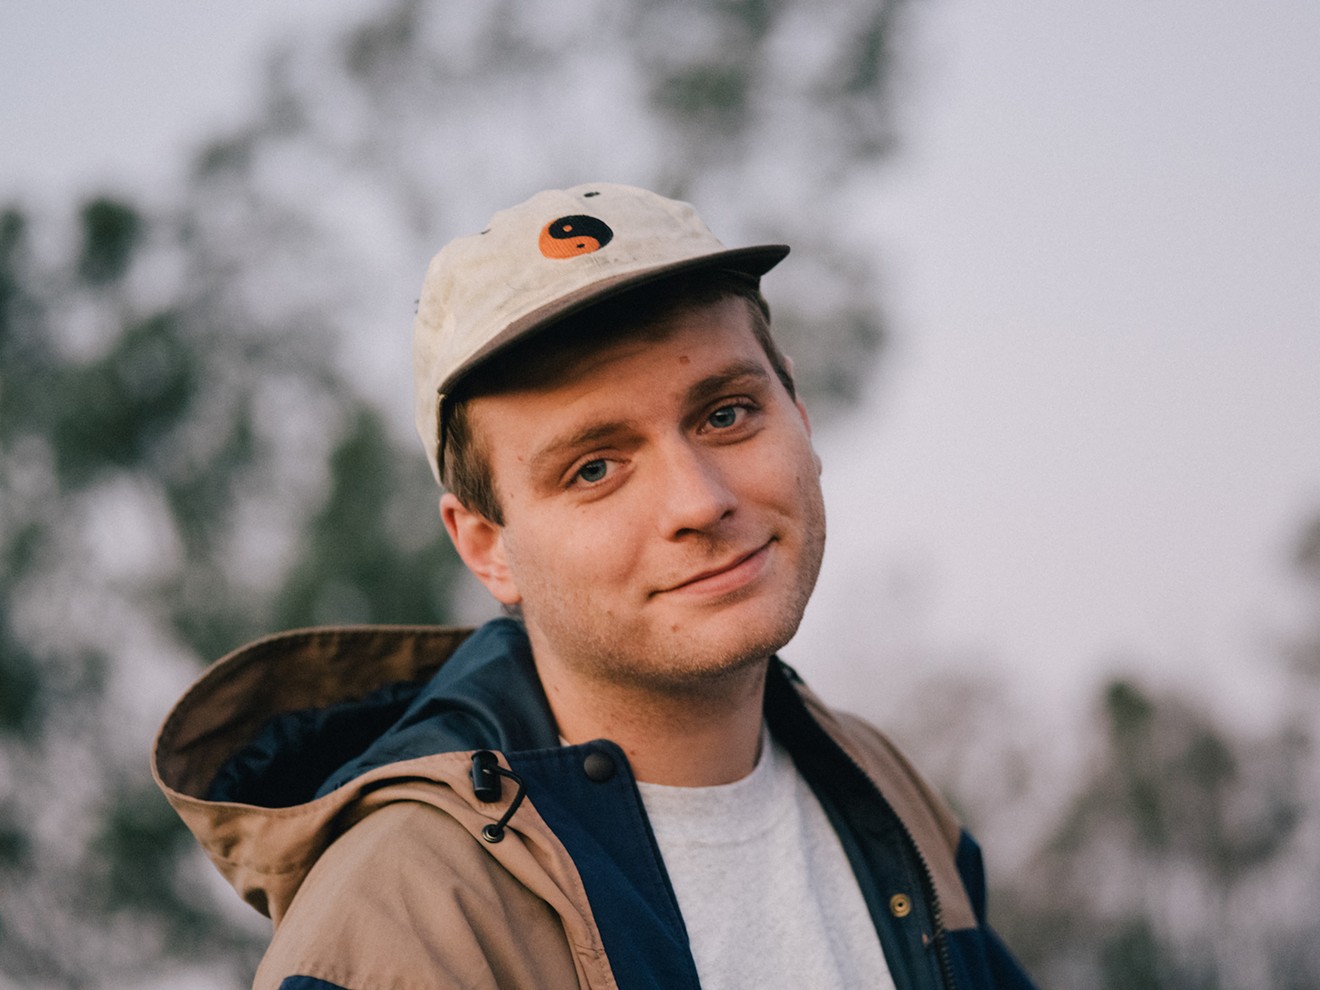 Mac DeMarco is bringing his blend of R&B and lo-fi jangle pop to Red Rocks.